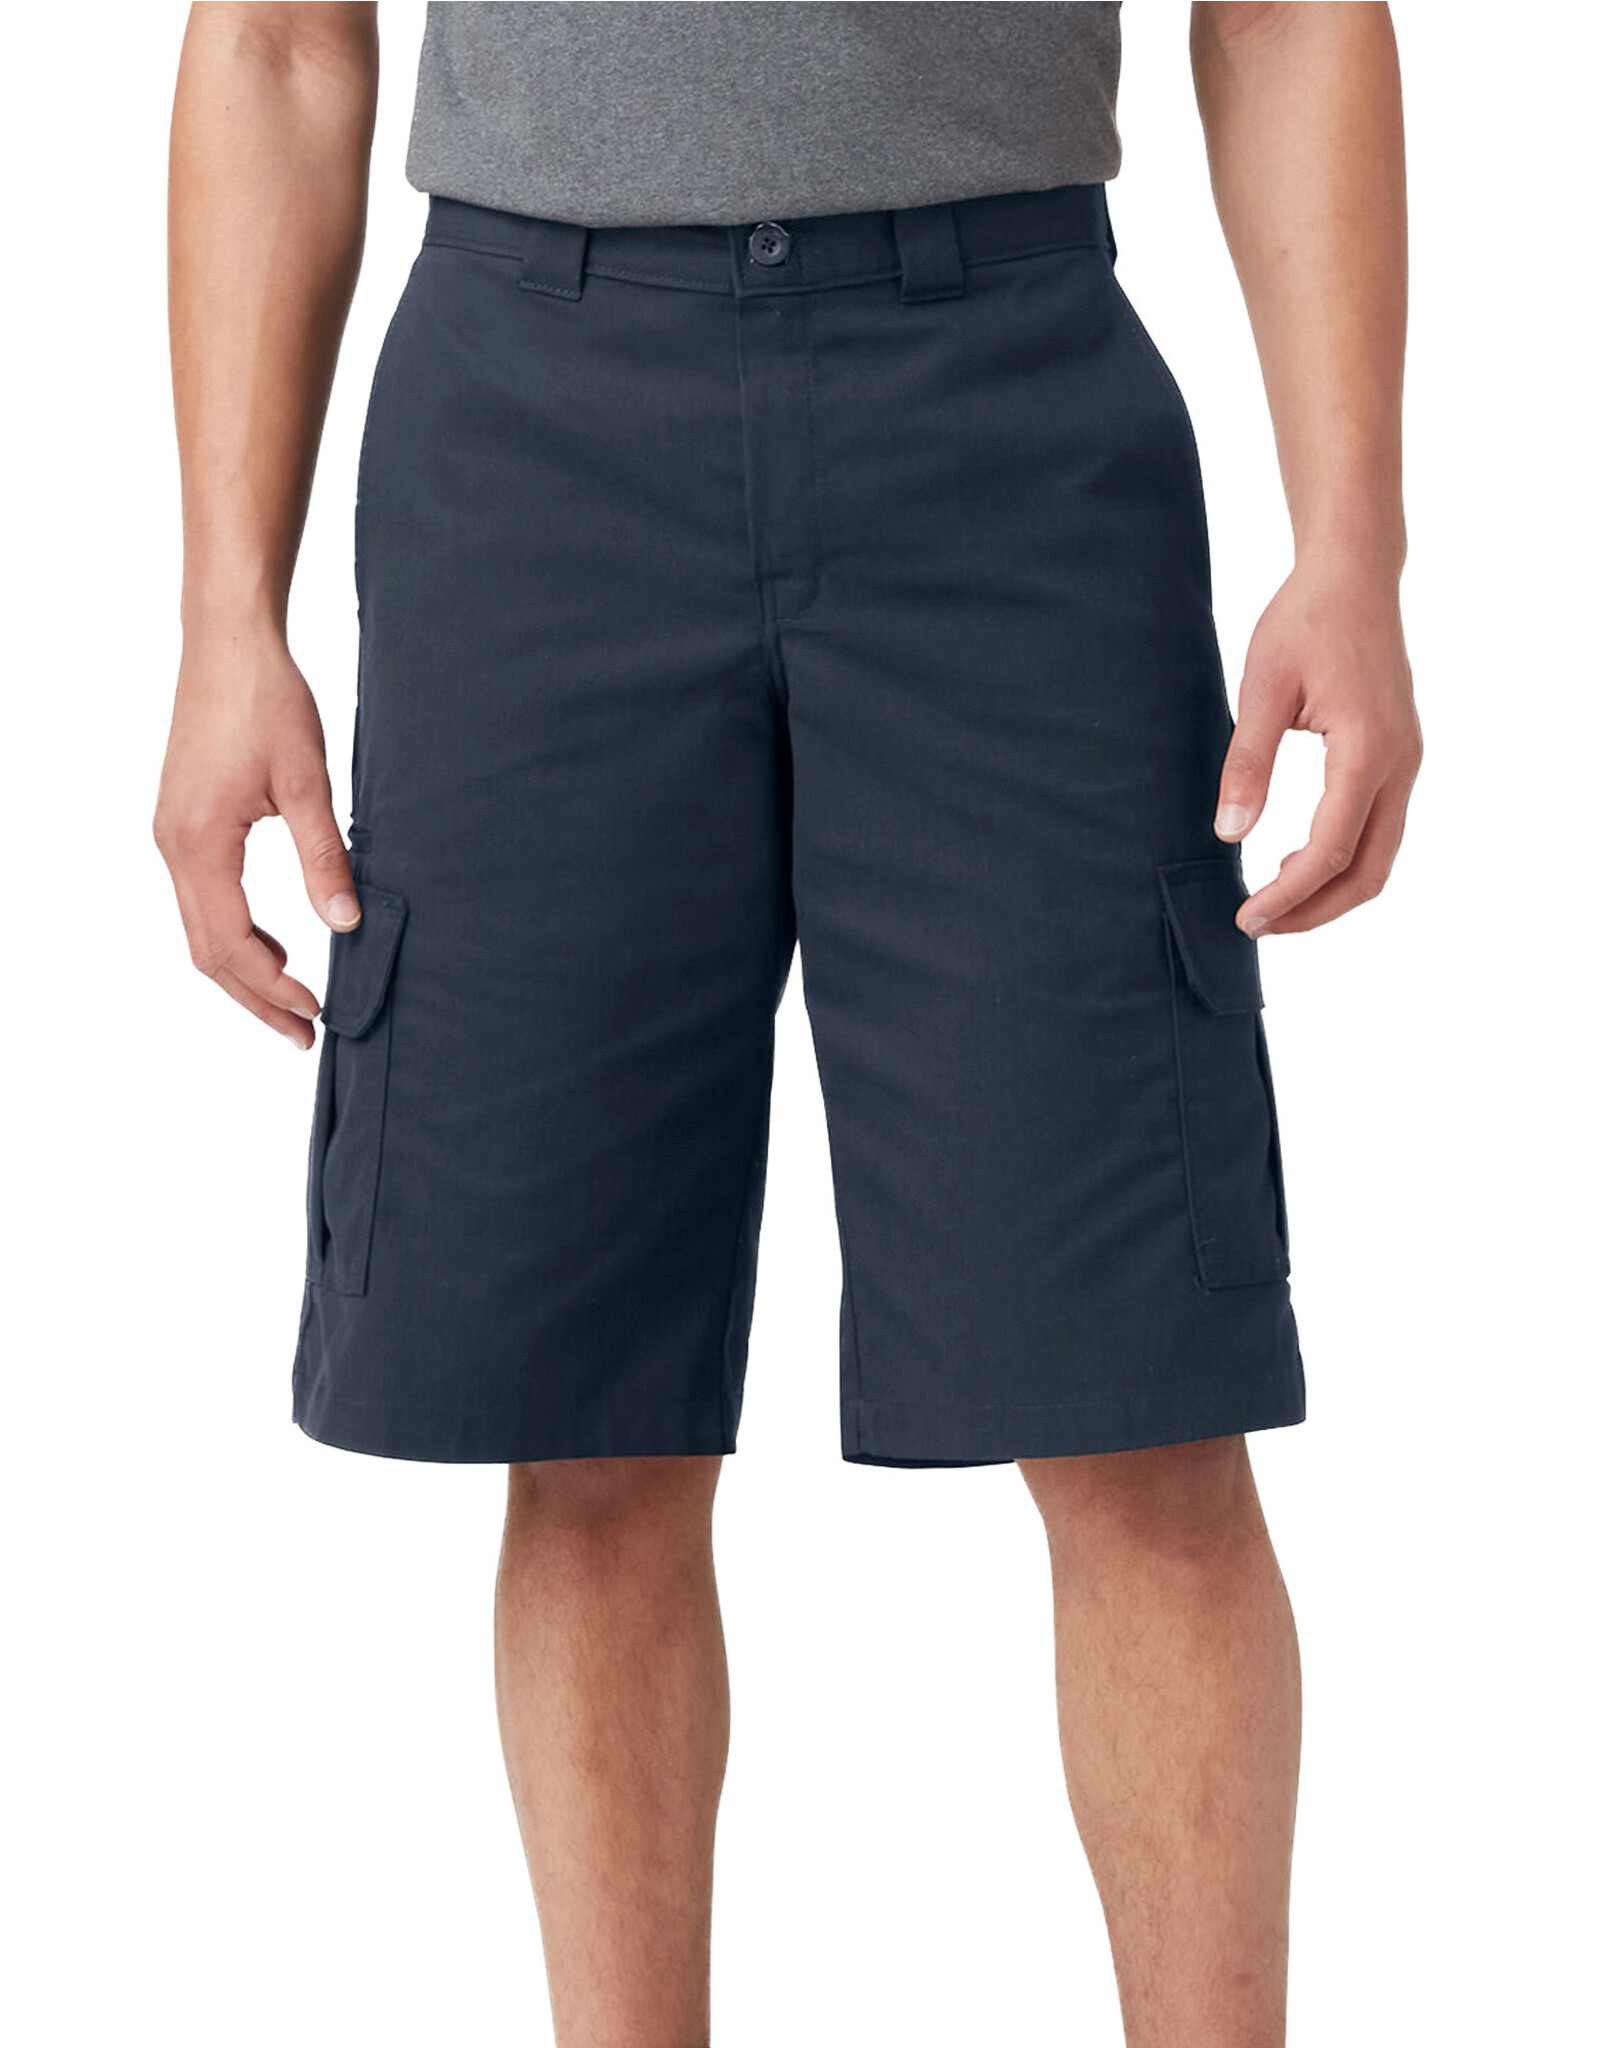 DICKIES 13" Relaxed Fit Twill Cargo Work Short Dark Navy - WR557DN